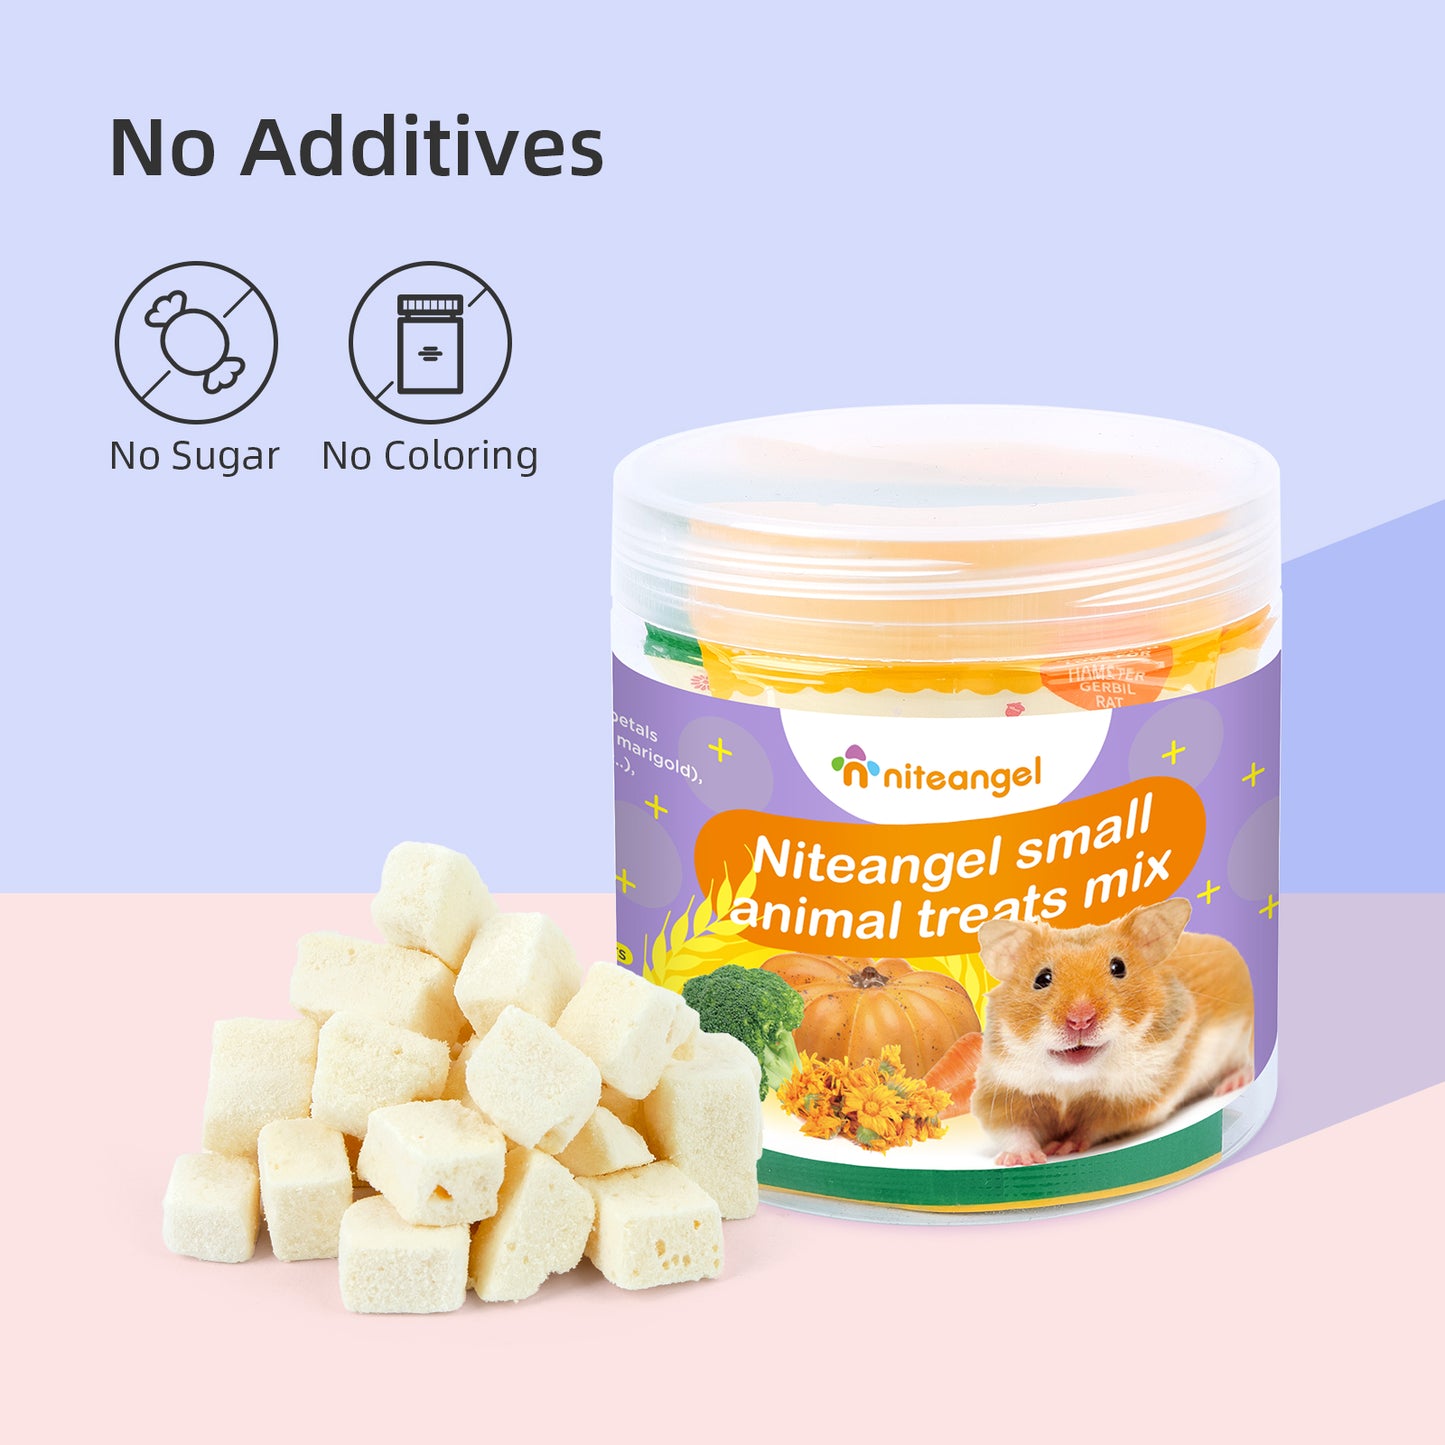 Niteangel Hamster Snack & Treats Toy - Small Animal Natural Treat Mix for Dwarf Syrian Robo Hamsters Gerbils Mice Lemmings Degus or Other Small-Sized Pets